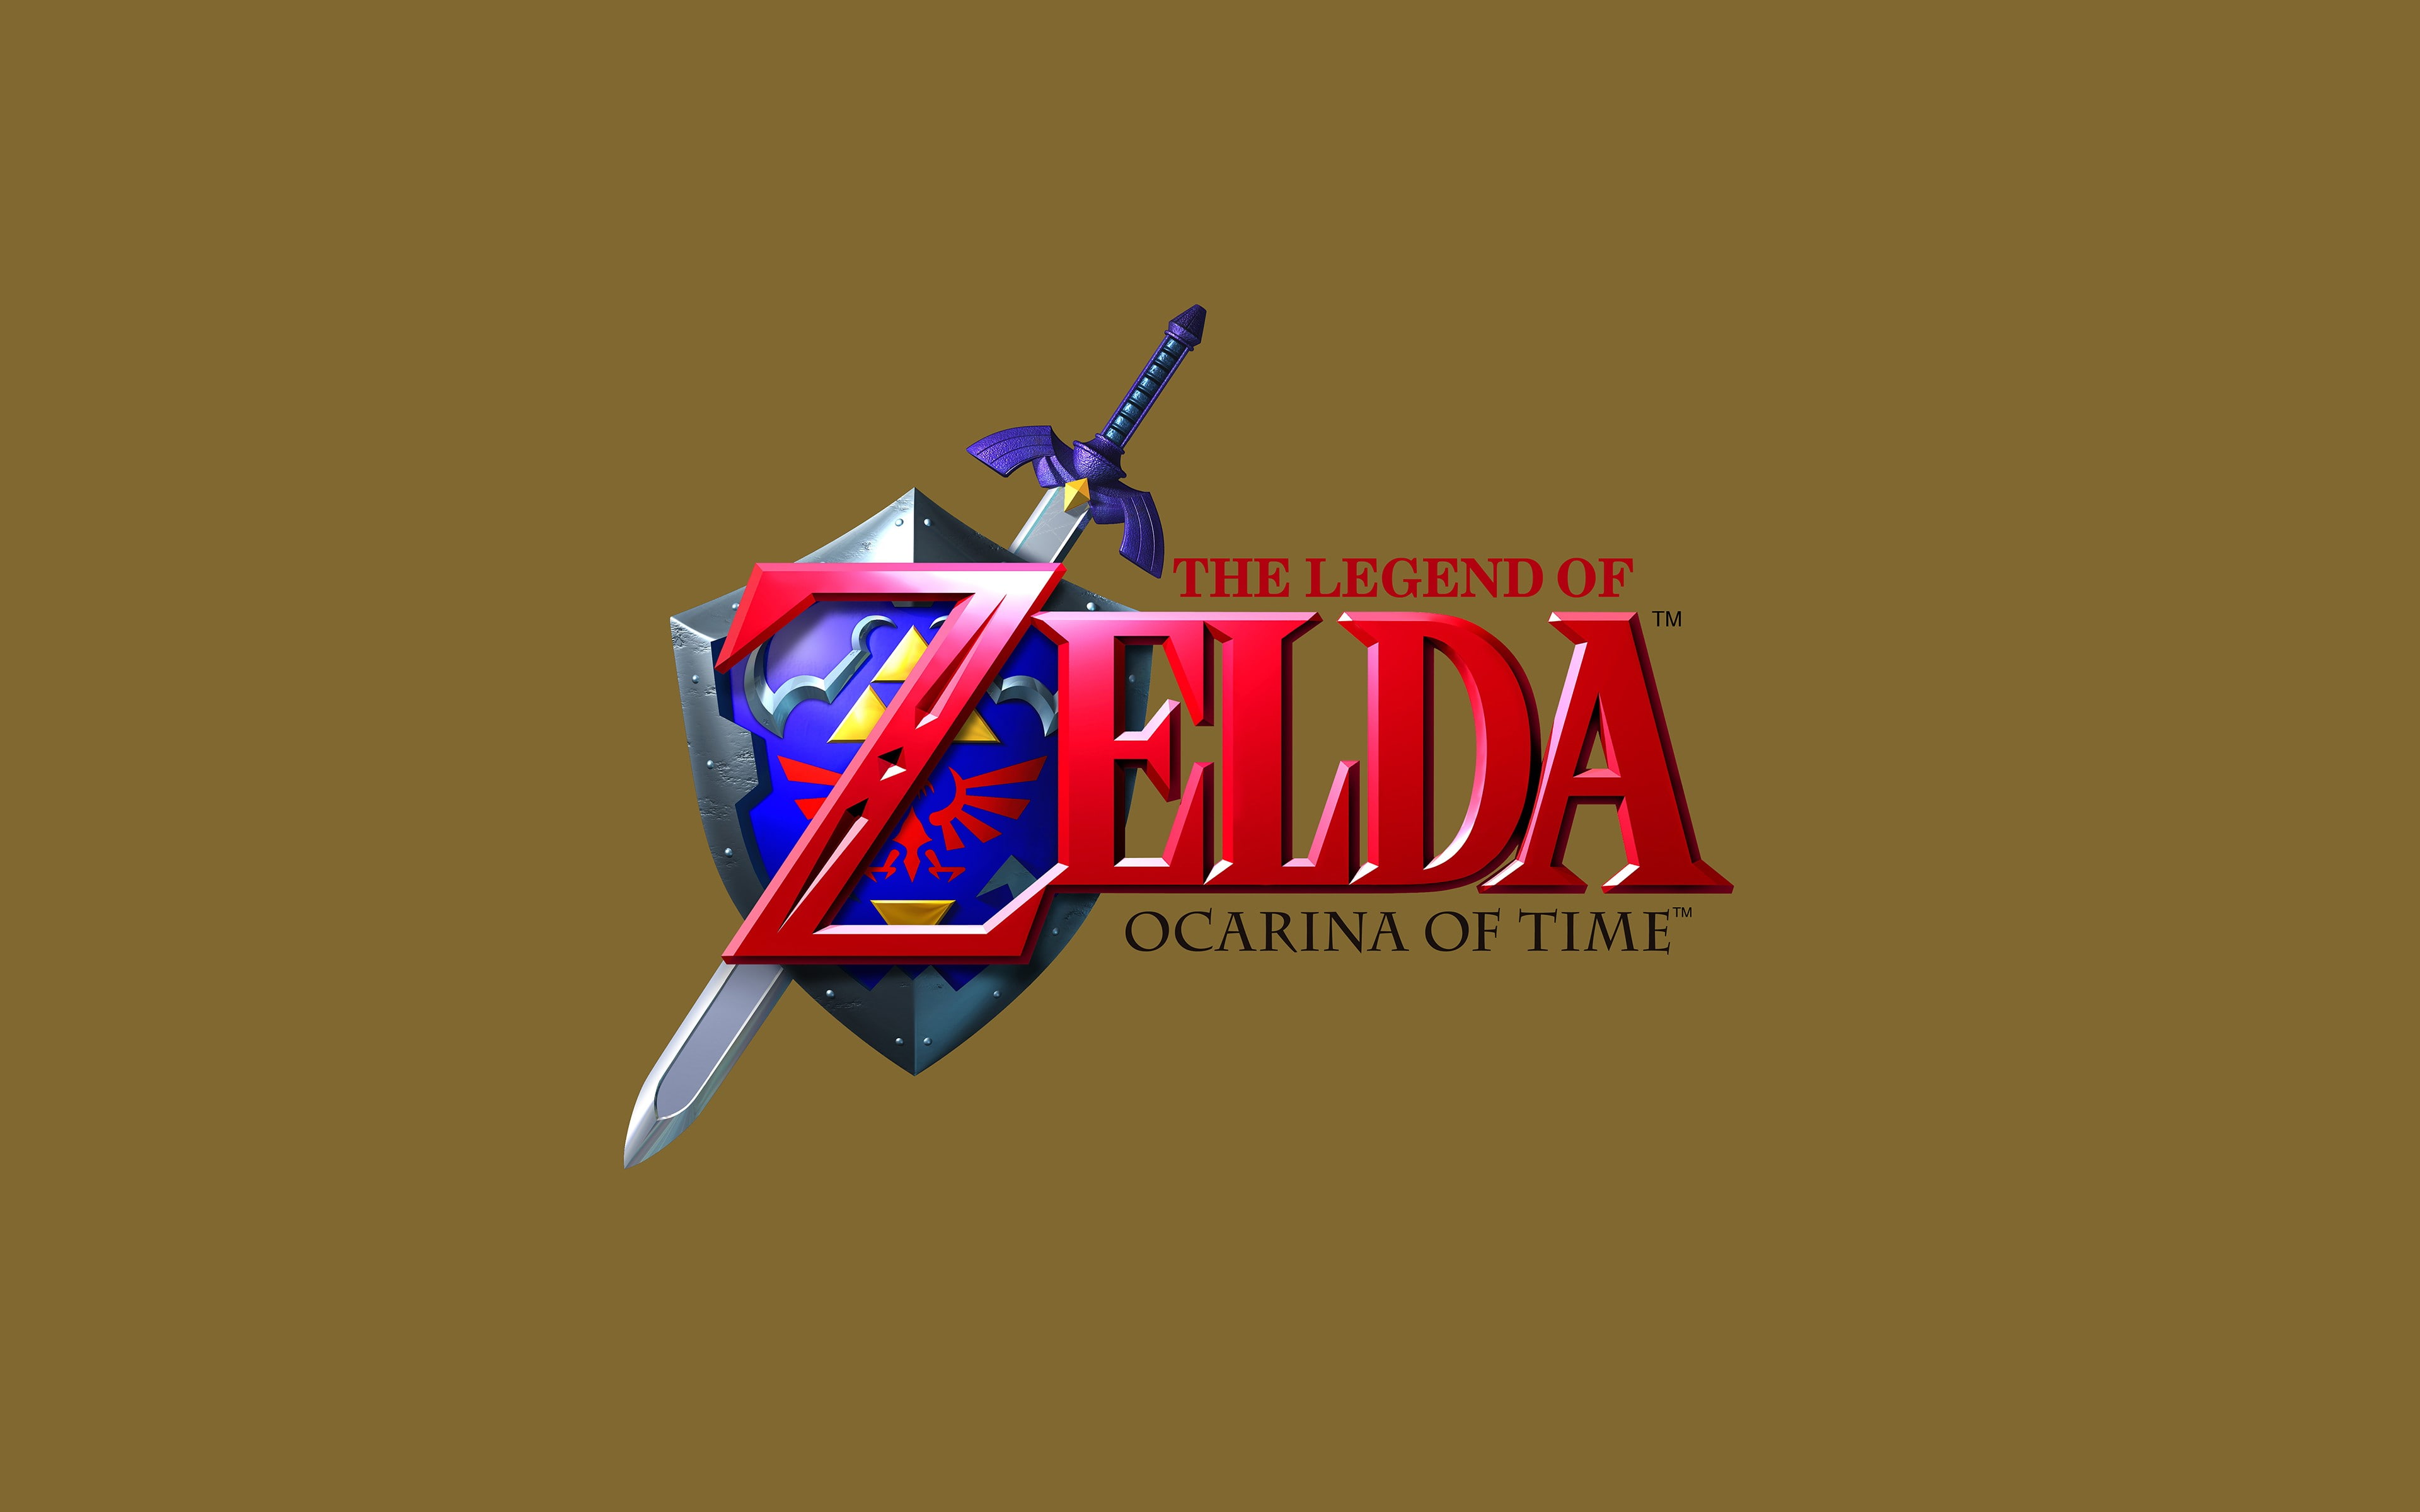 Hylian Shield, retro games, video games, simple background